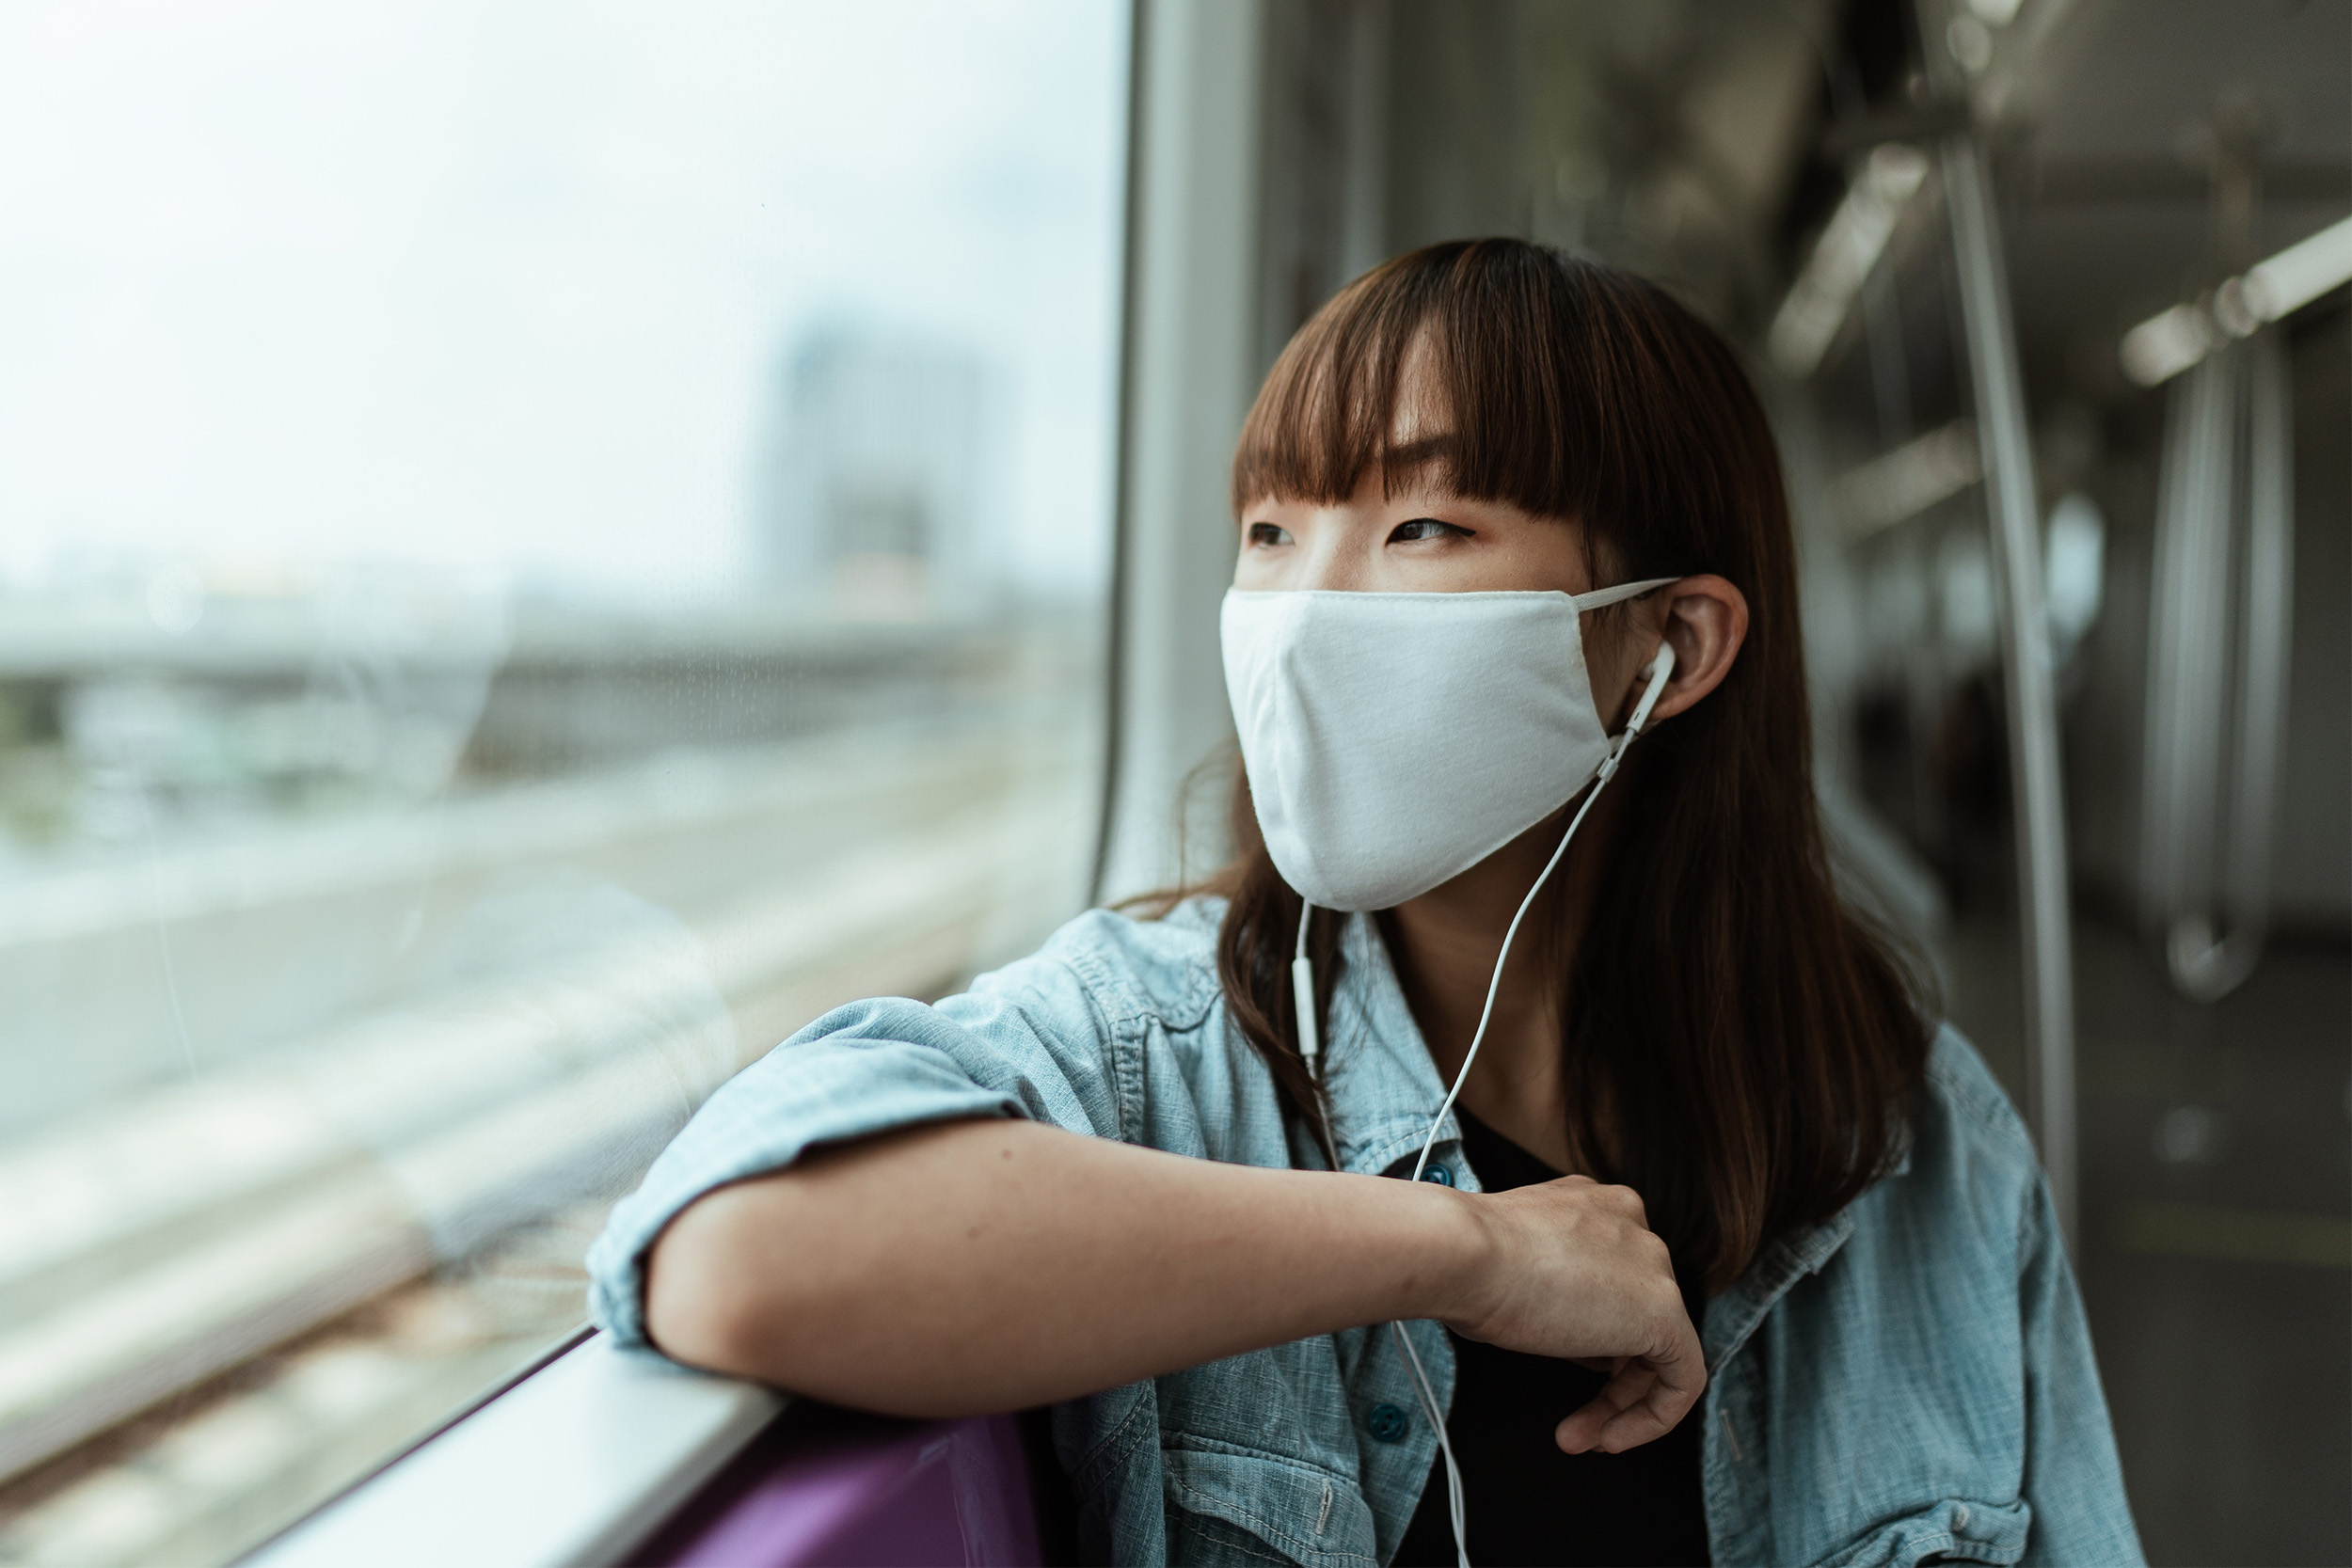 a young woman sitting on a train, wearing a face mask.